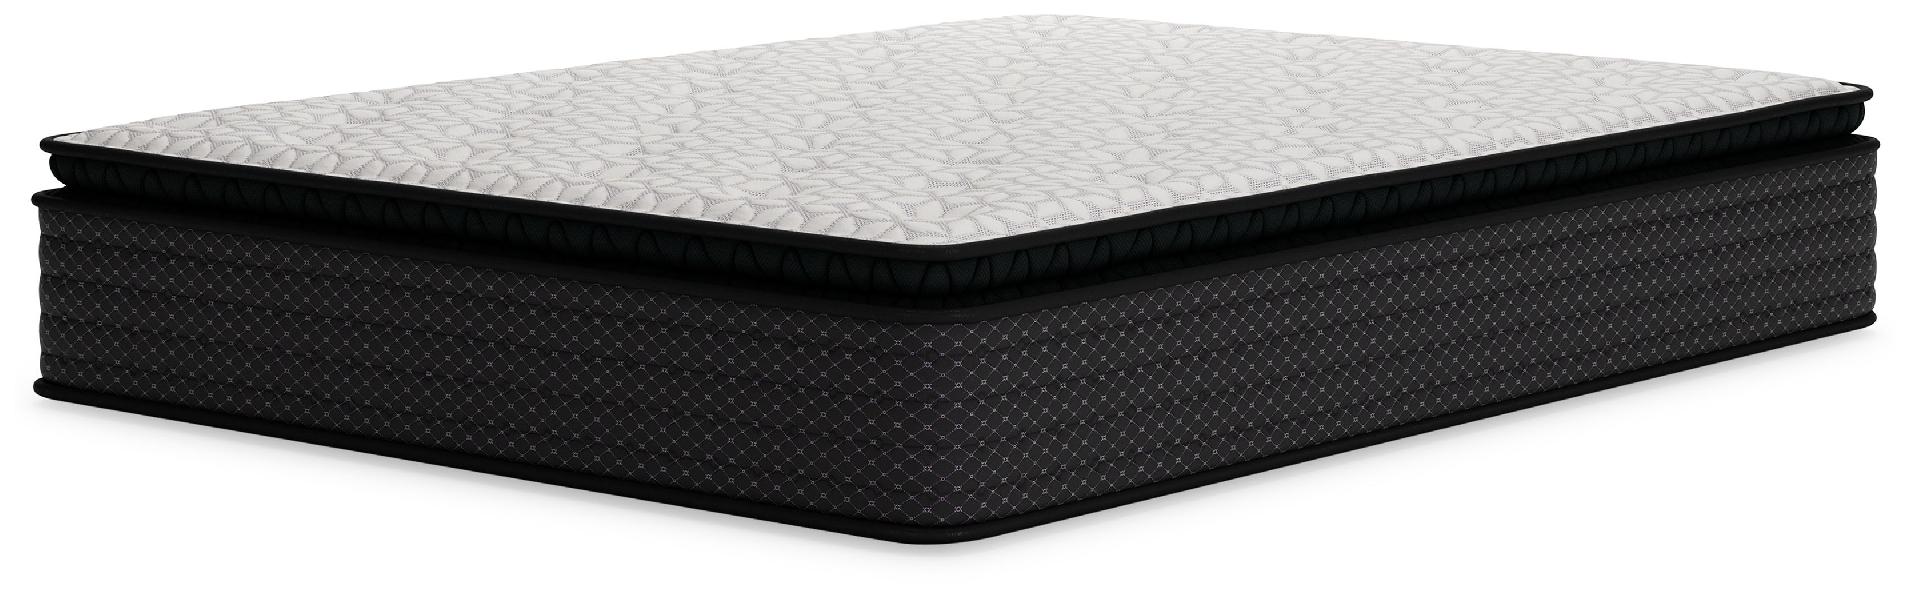 Image of Limited Edition Pt - White - California King Mattress